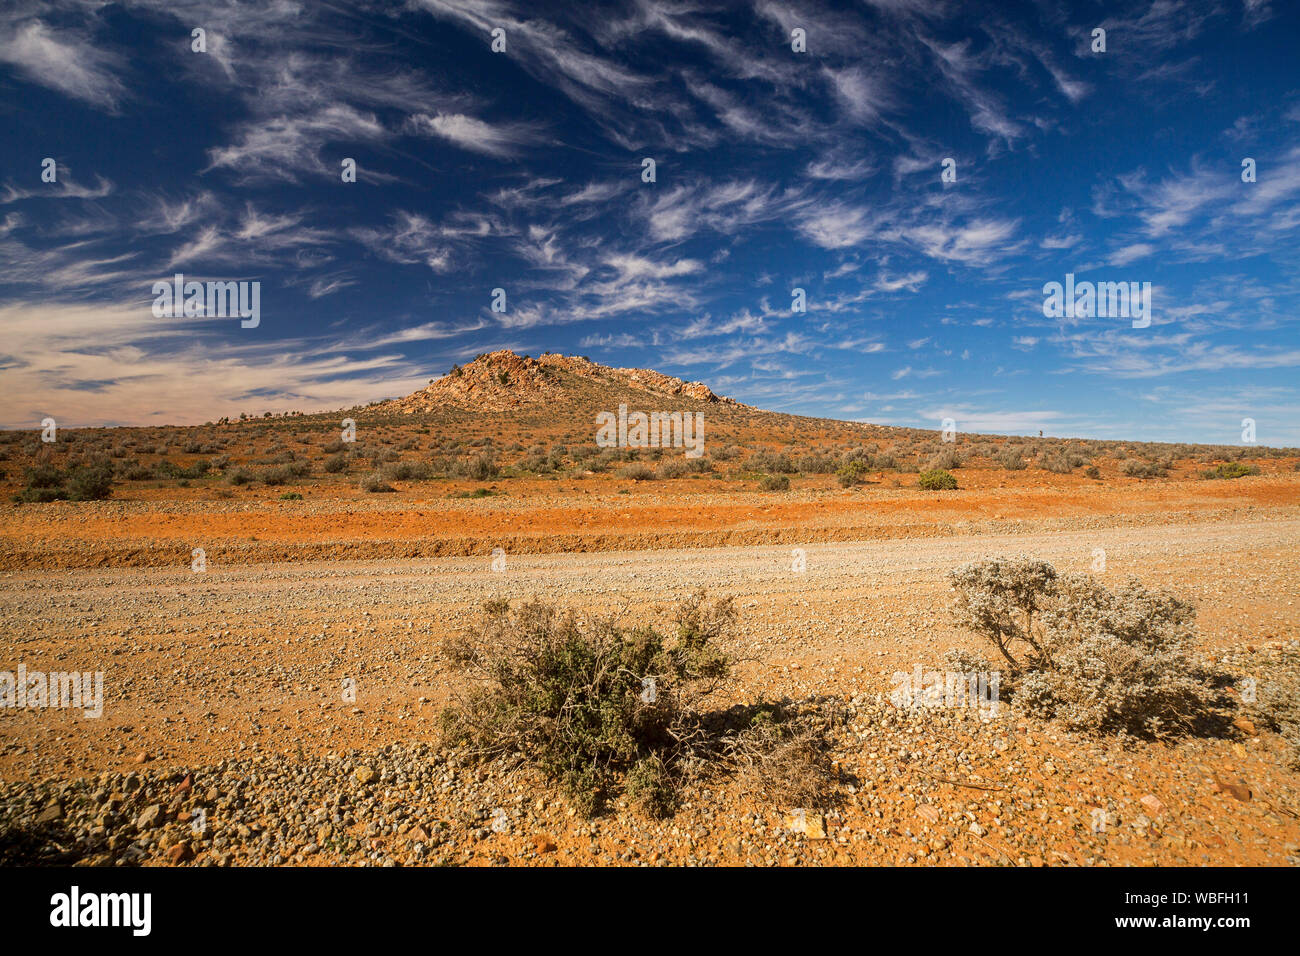 Arid stony outback landscape of Flinders Ranges region with low hill on horizon rising into blue sky freckled with clouds in South Australia Stock Photo